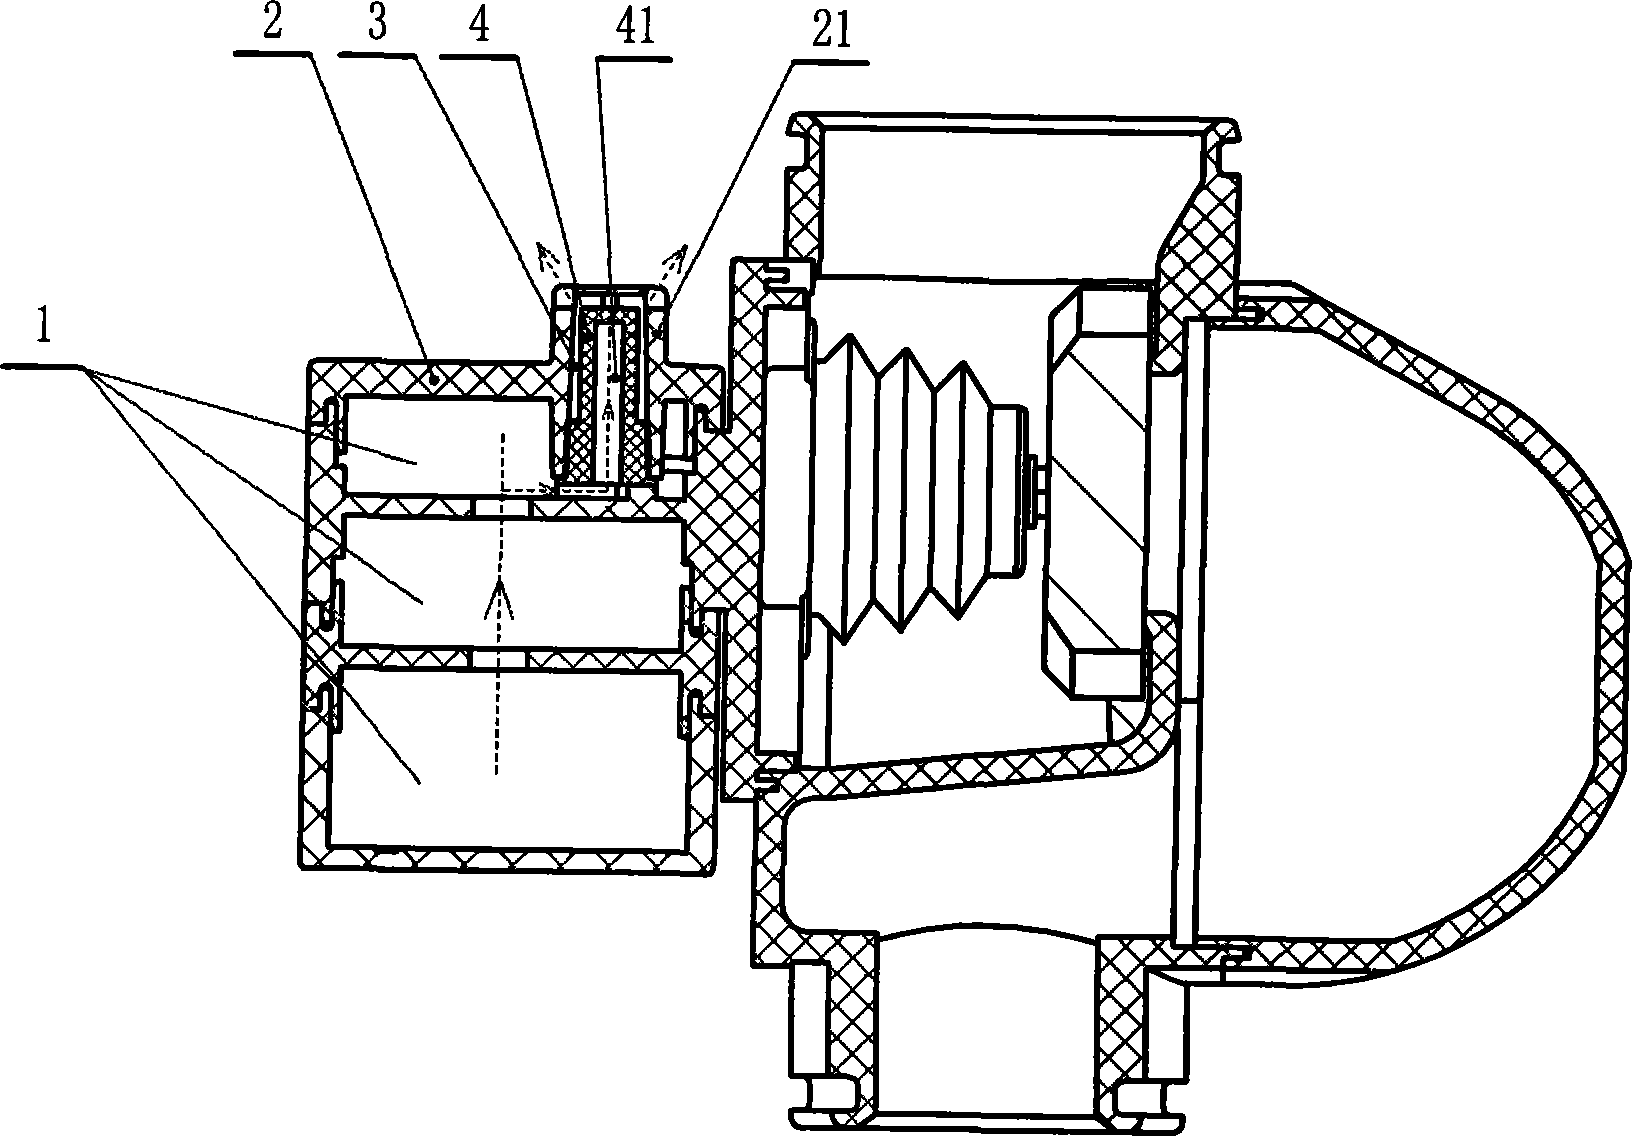 Exhaust for gas meter valve